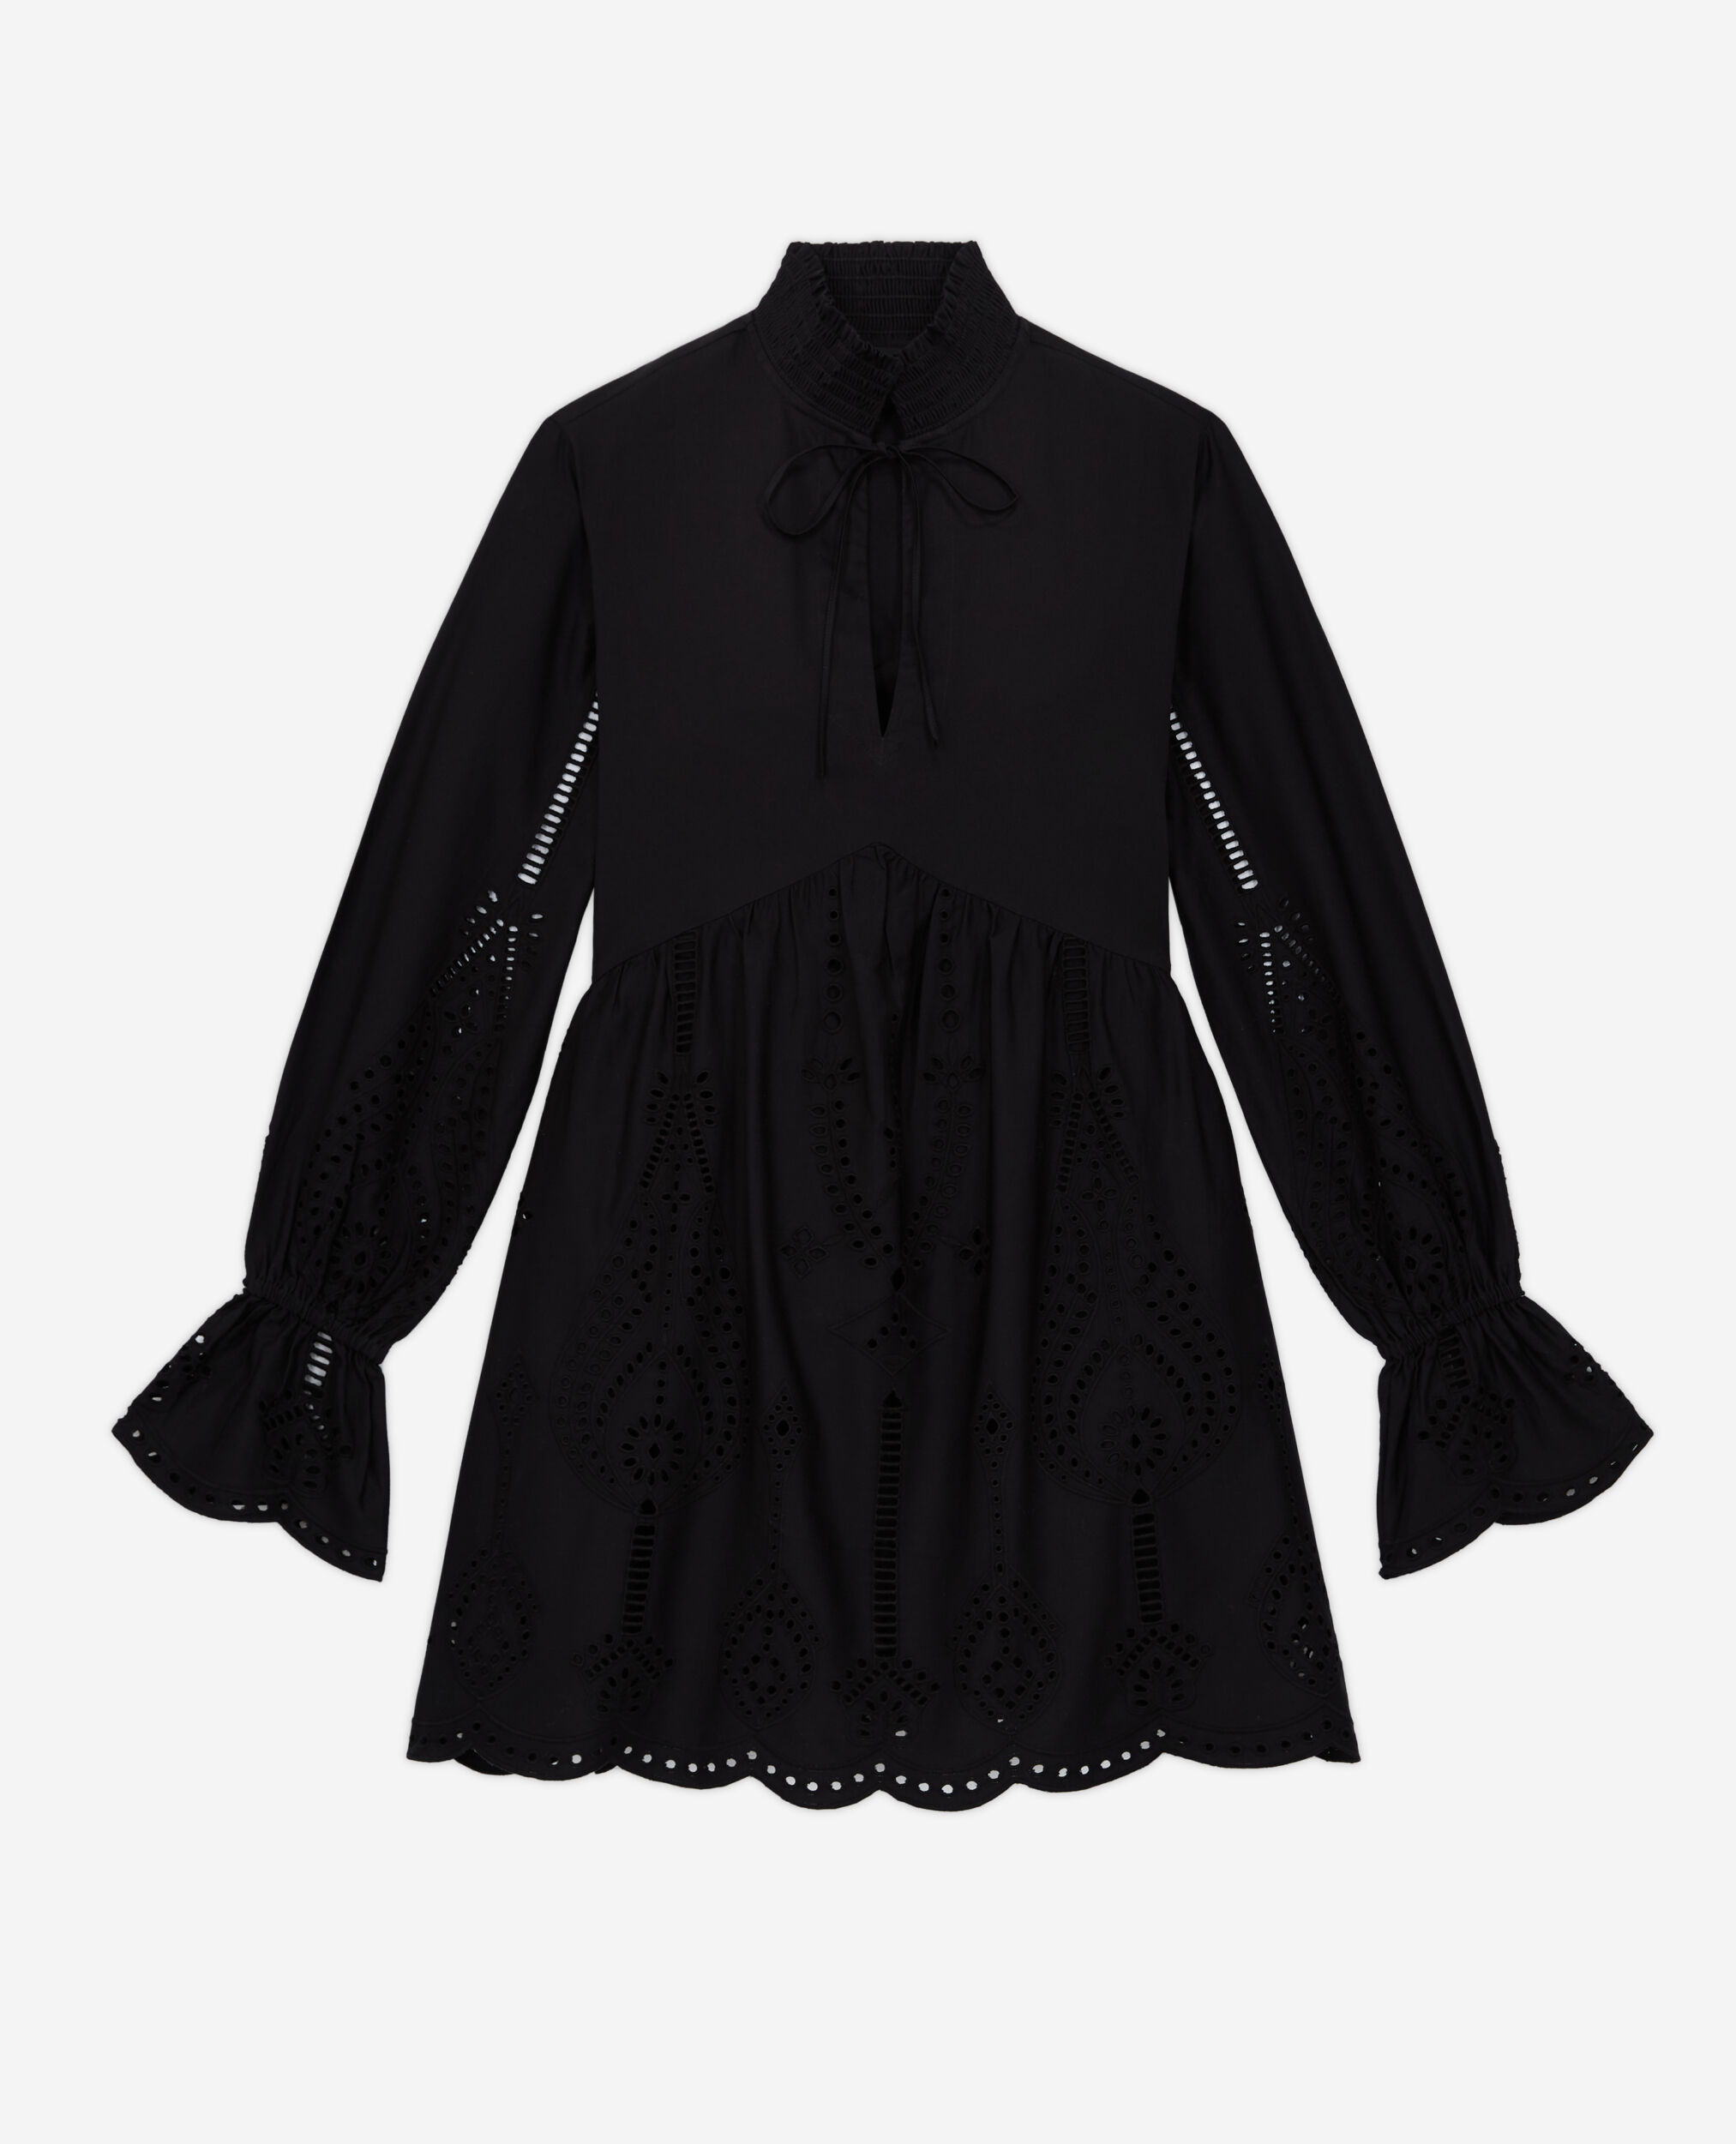 Robe courte noire avec broderie Anglaise, BLACK, hi-res image number null